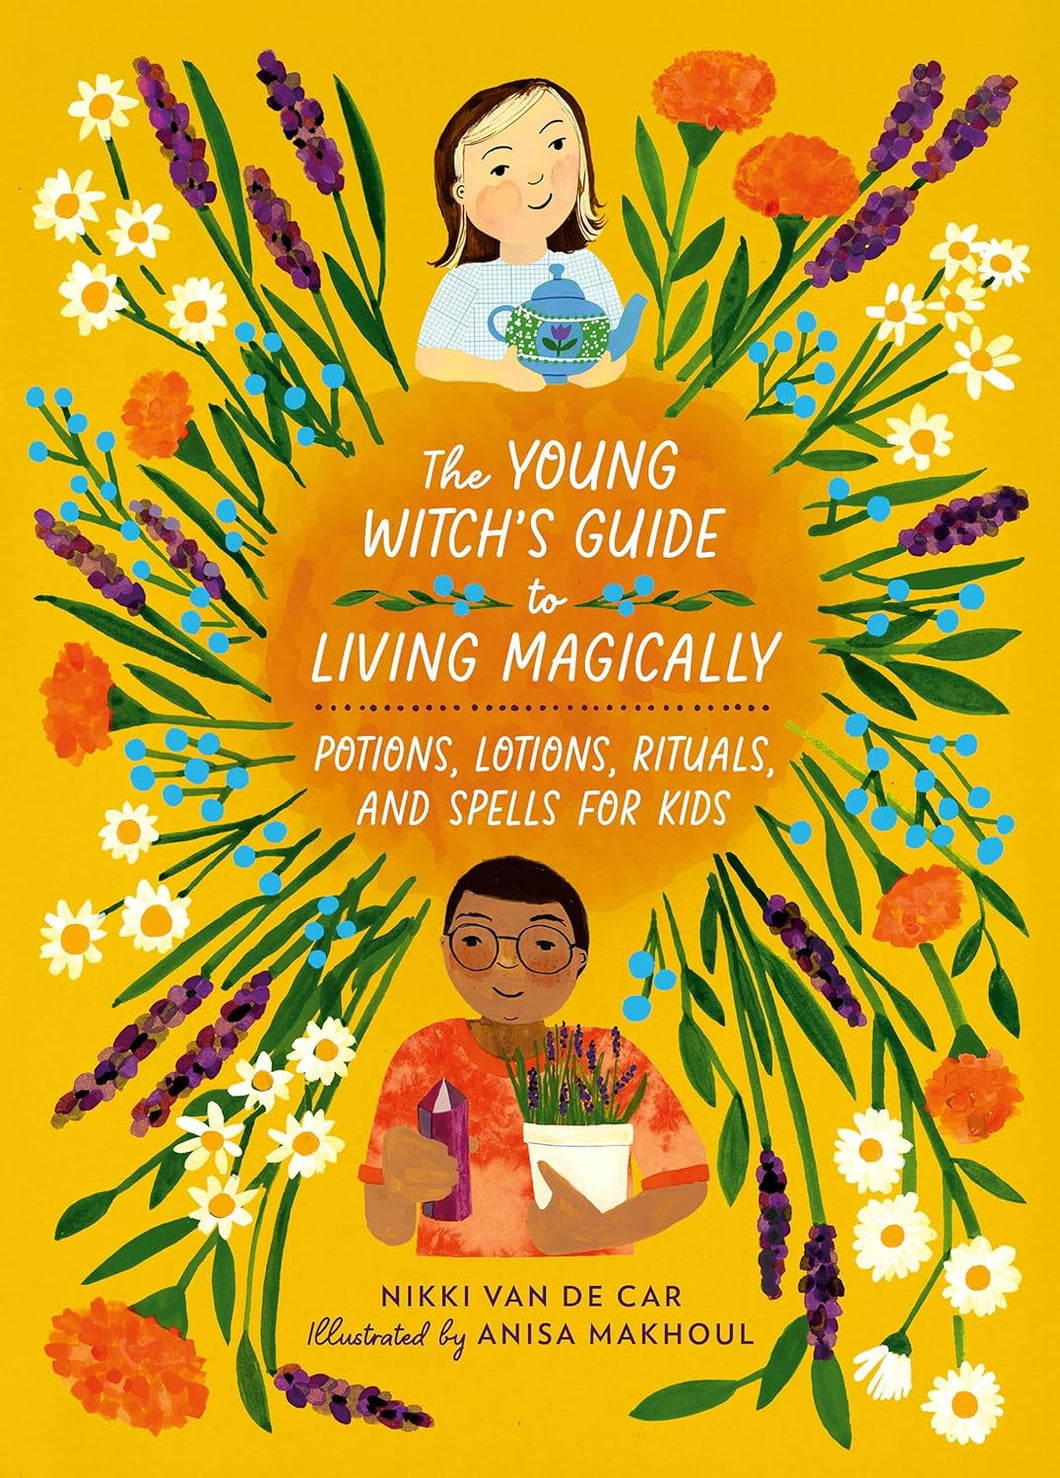 The Young Witch’s Guide to Living Magically: Potions, Lotions, Rituals, and Spells for Kids by Nikki Van De Car